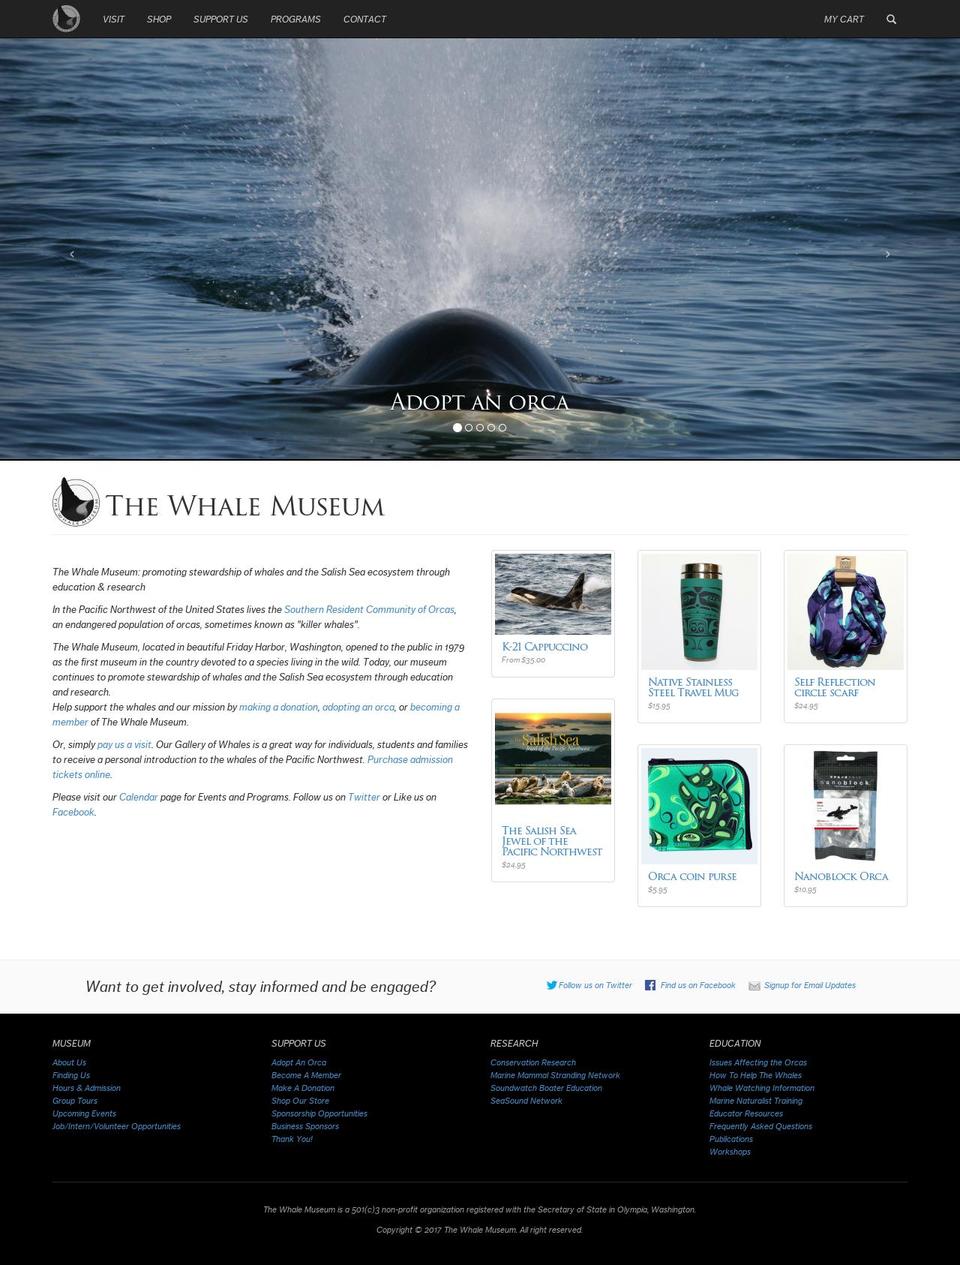 the-whale-musuem Shopify theme site example thewhalemuseum.org